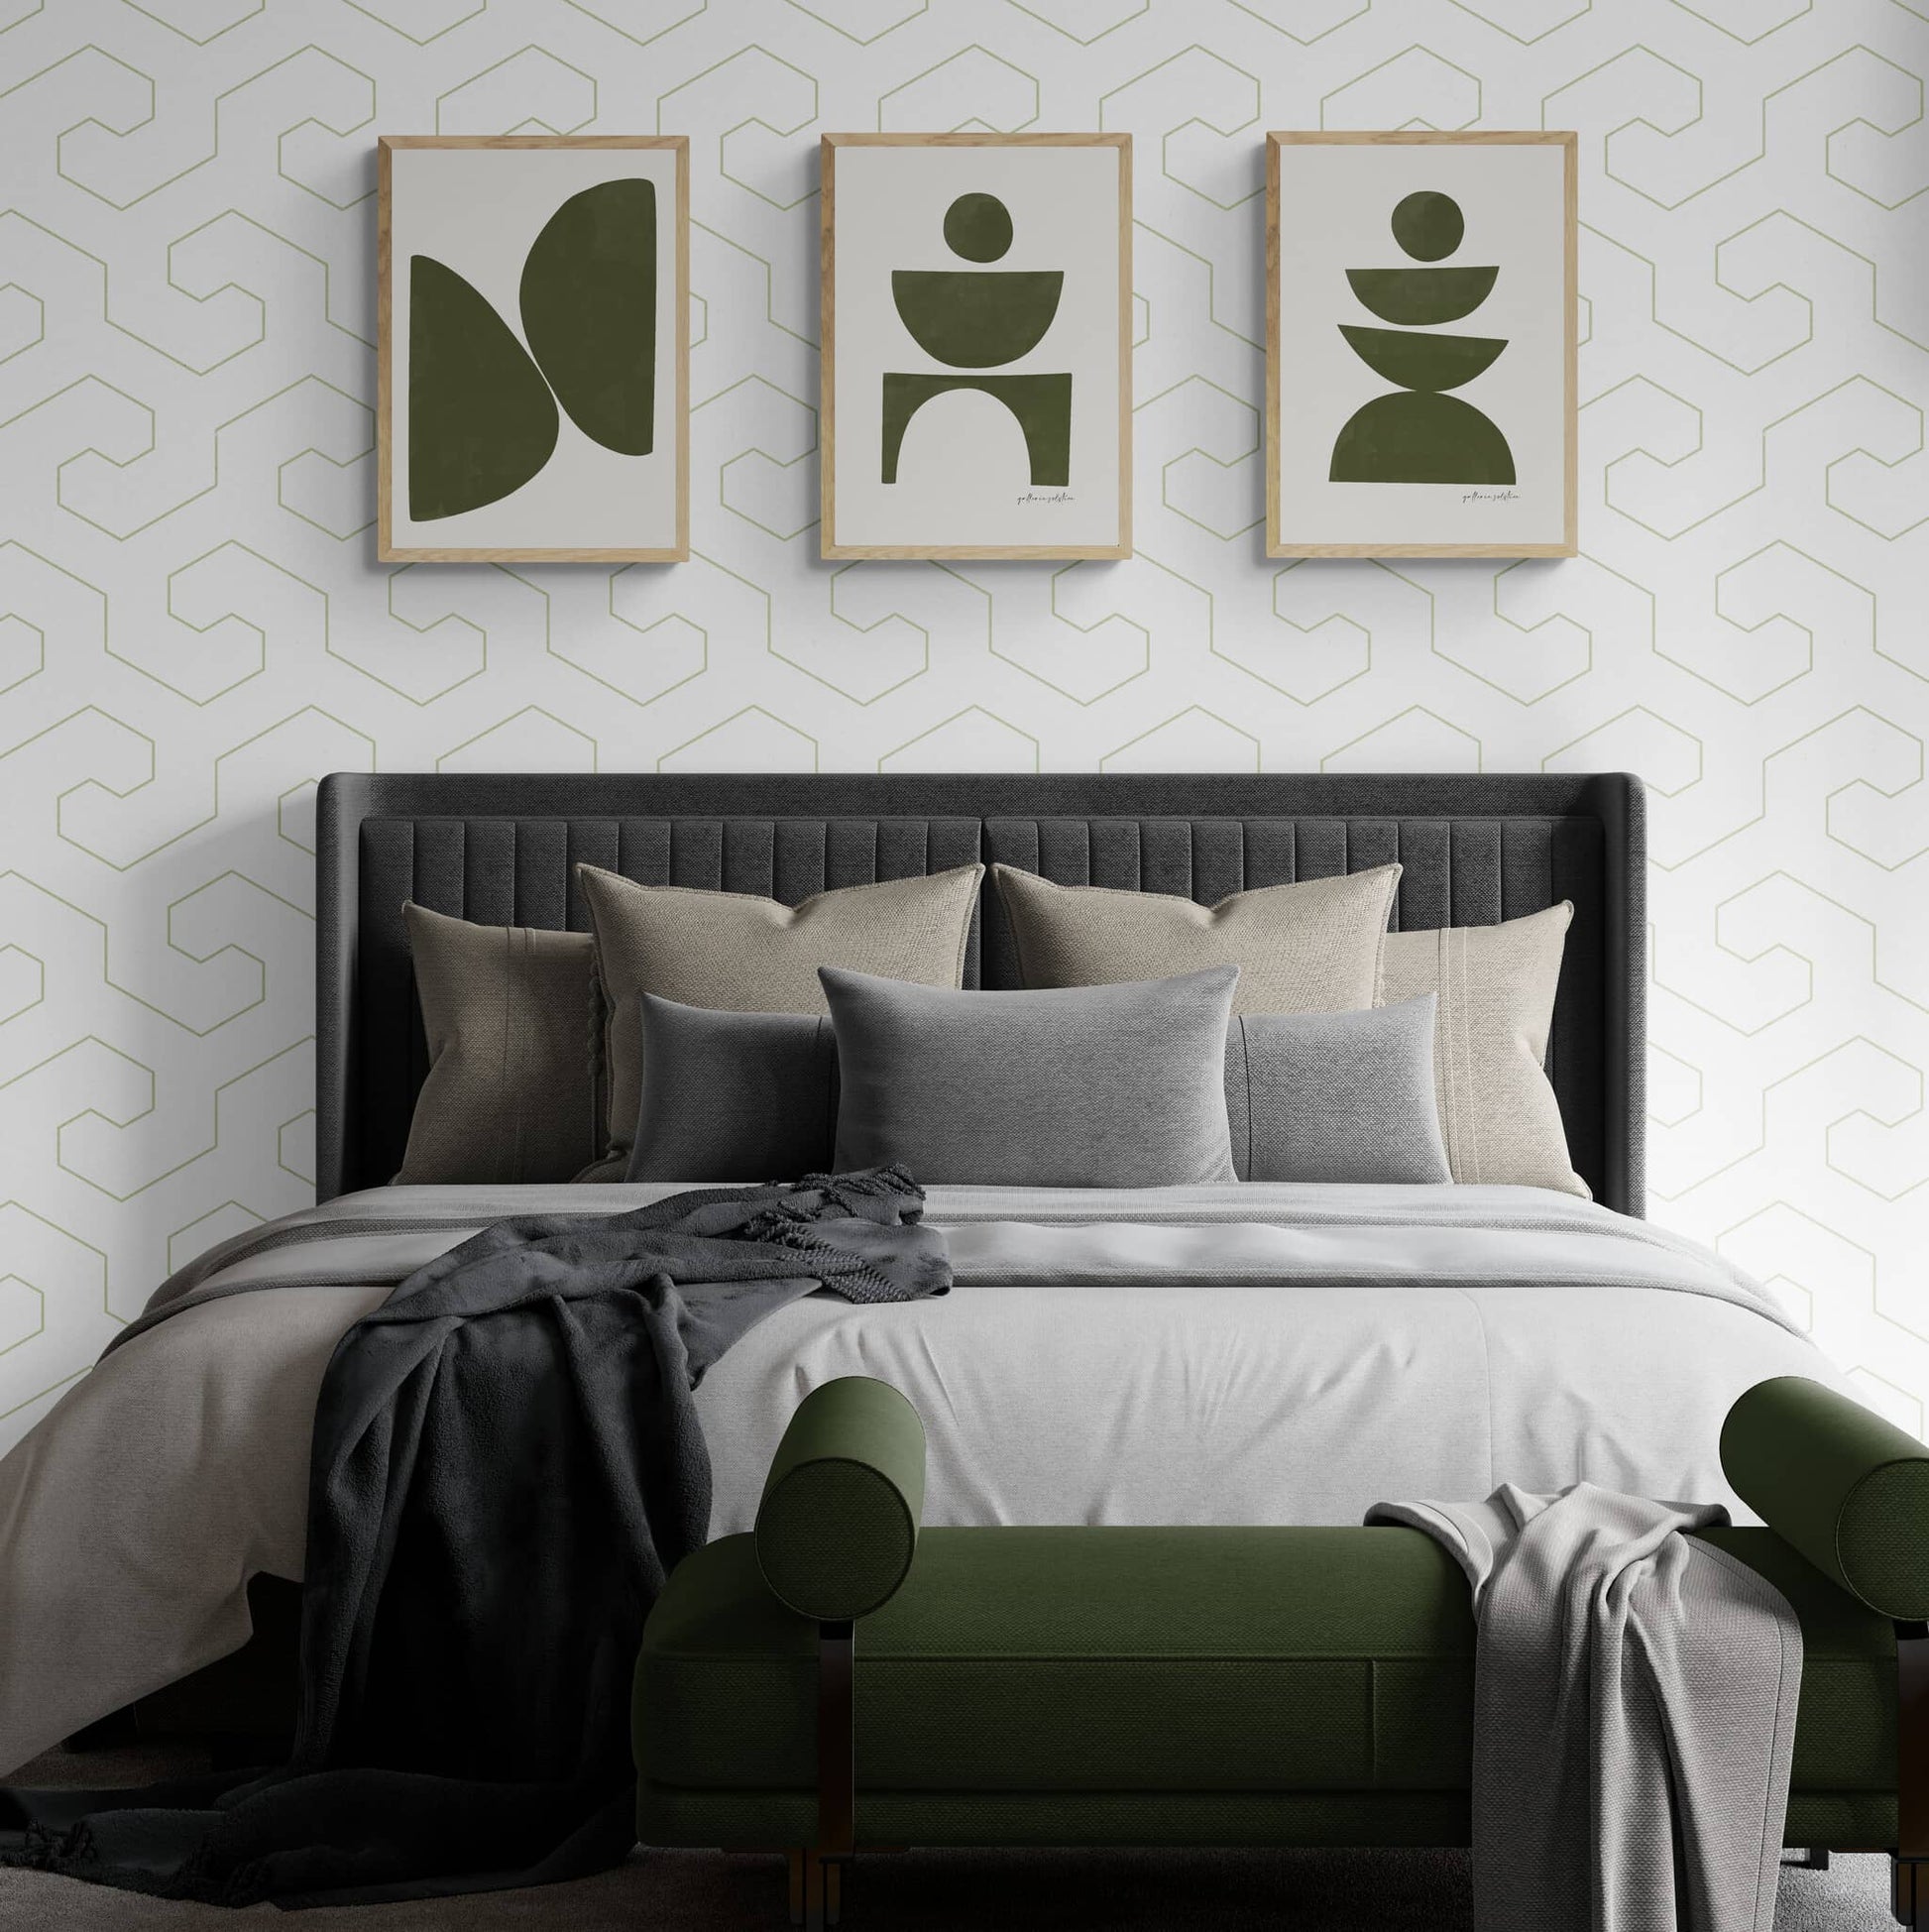 Three olive green mid-century style prints hanging on wall above a bed.